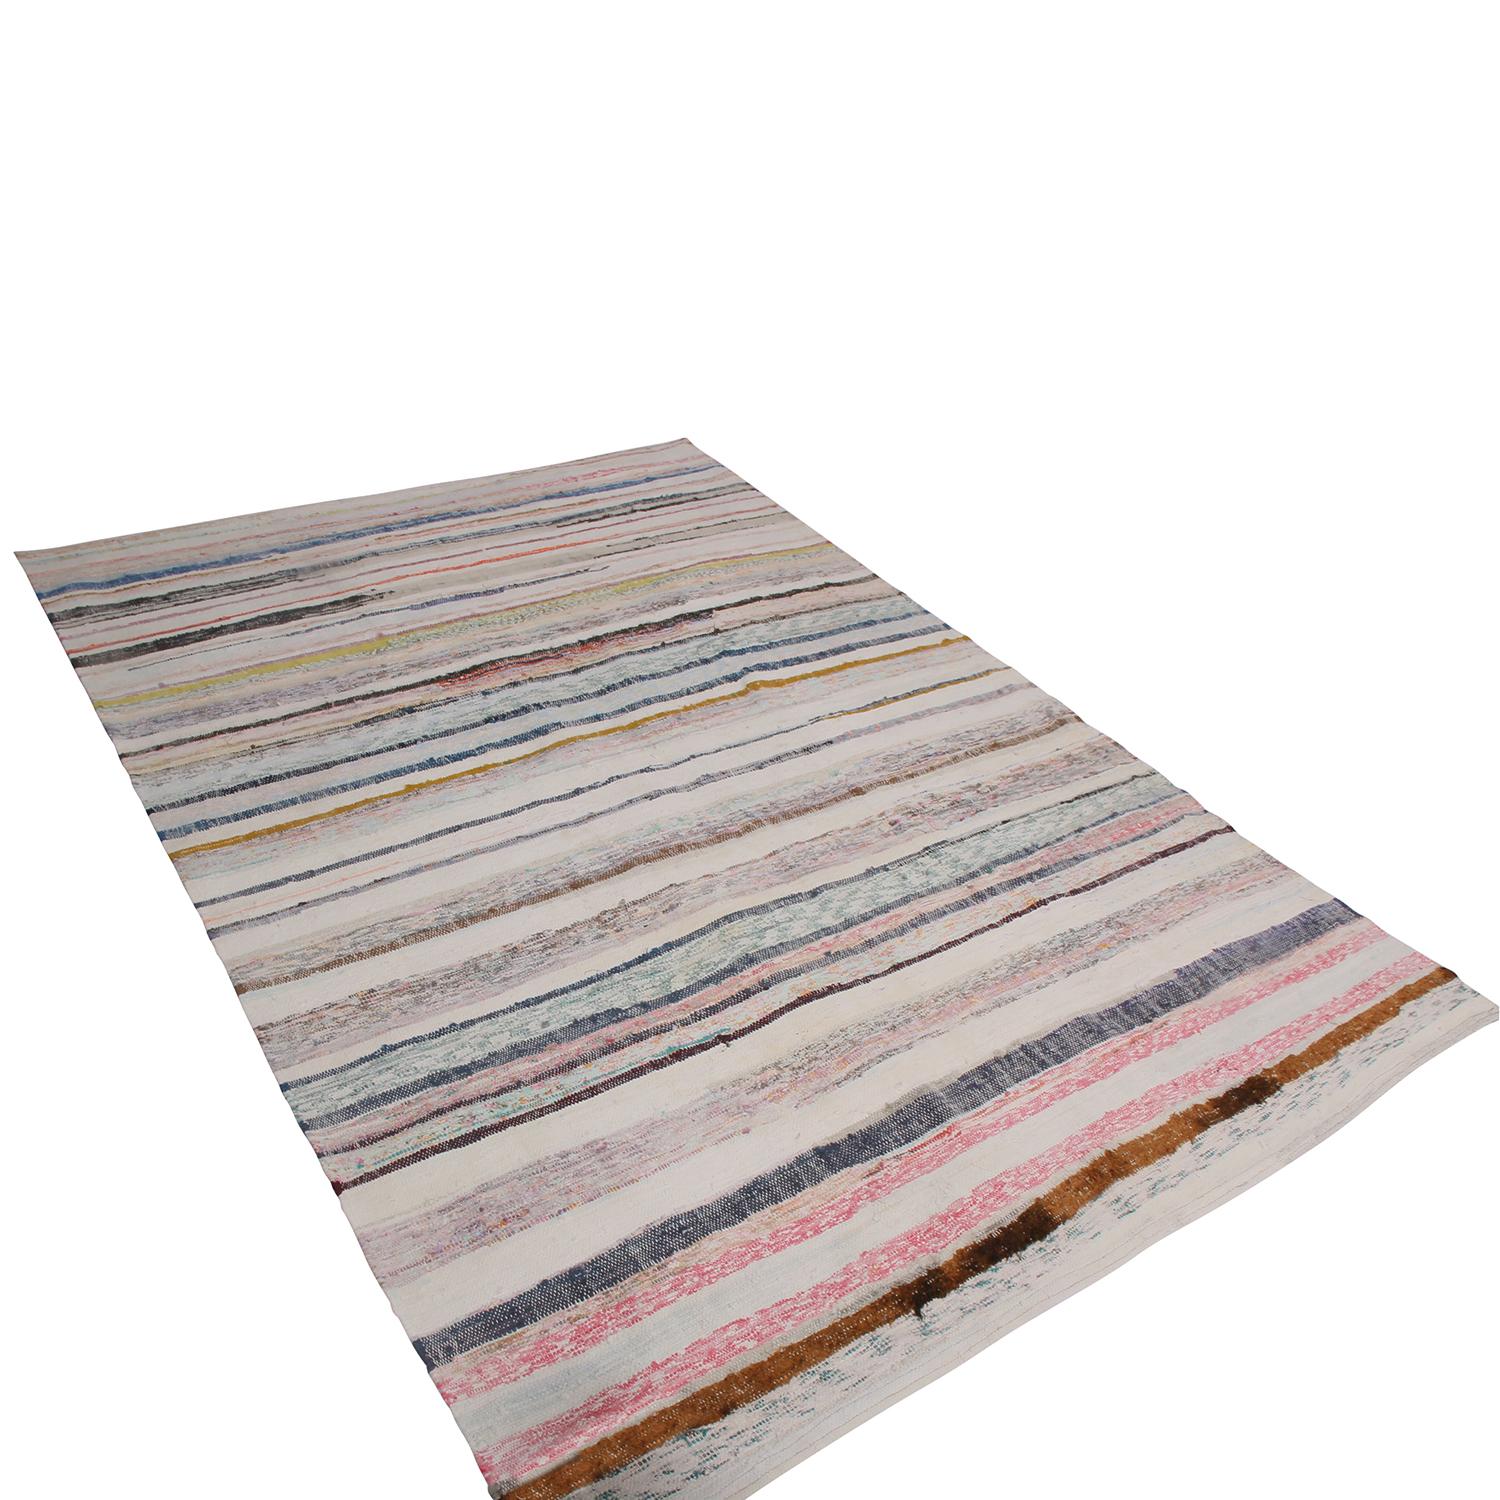 Handwoven in Turkey originating between 1970-1980, this vintage Chaput Kilim rug enjoys an admirable example of the intricate colorway variations special pieces from this family of flat-weaves enjoy. The stripes of lively pink, blue, black, read and